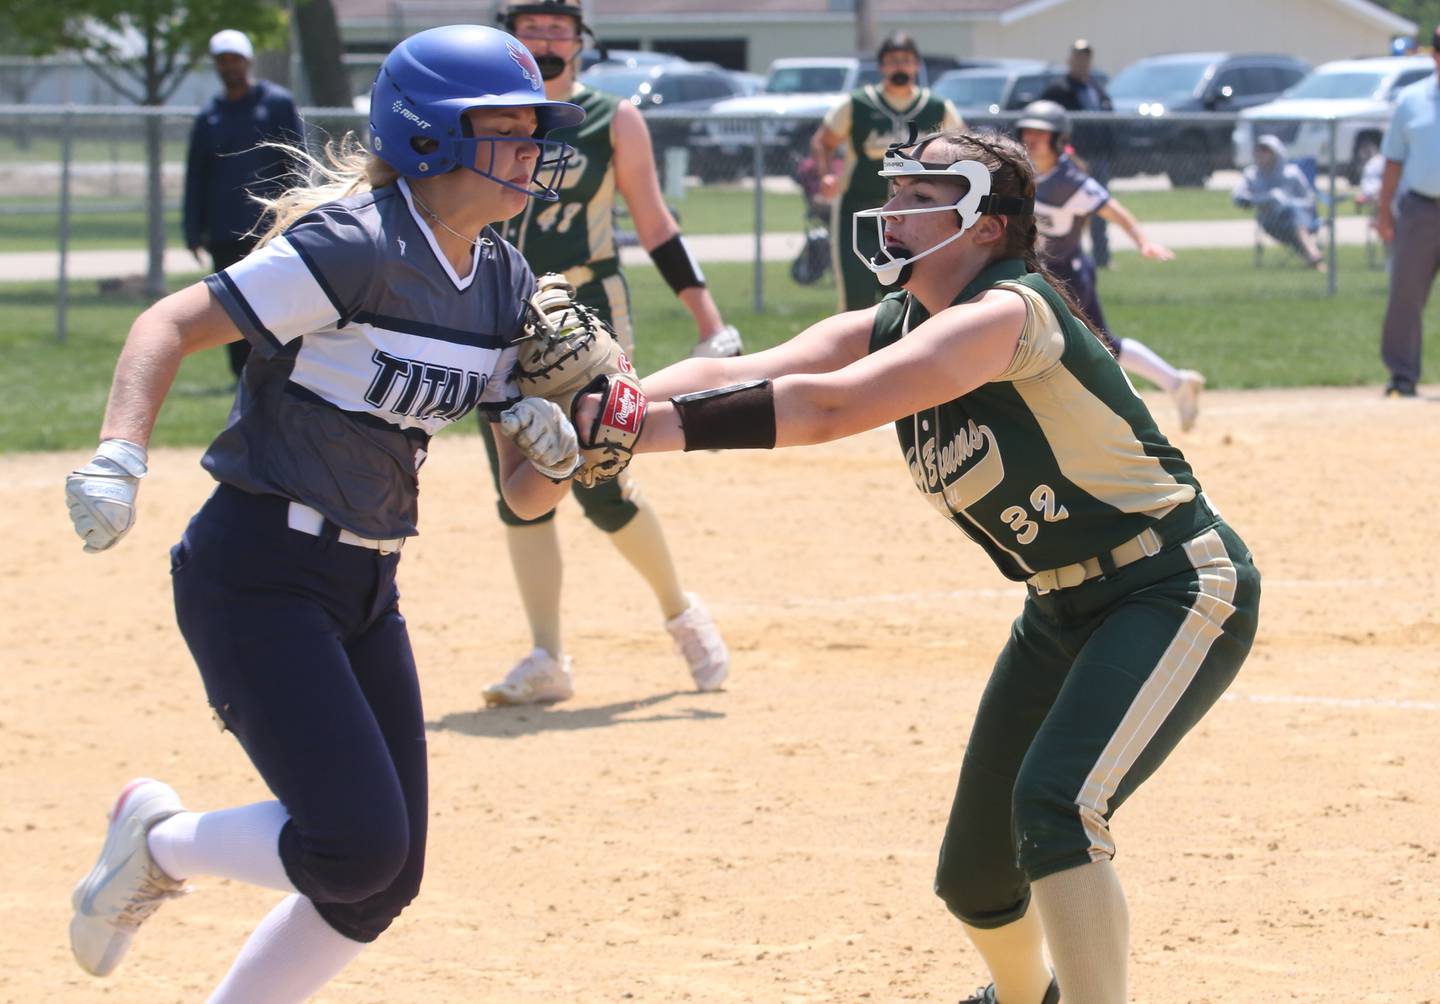 St. Bede's Maddy Dalton tags out Annawan/Wethersfield's Paige Huffman for the final out in the Class 1A Regional final game on Saturday, May 20, 2023 in Annawan.